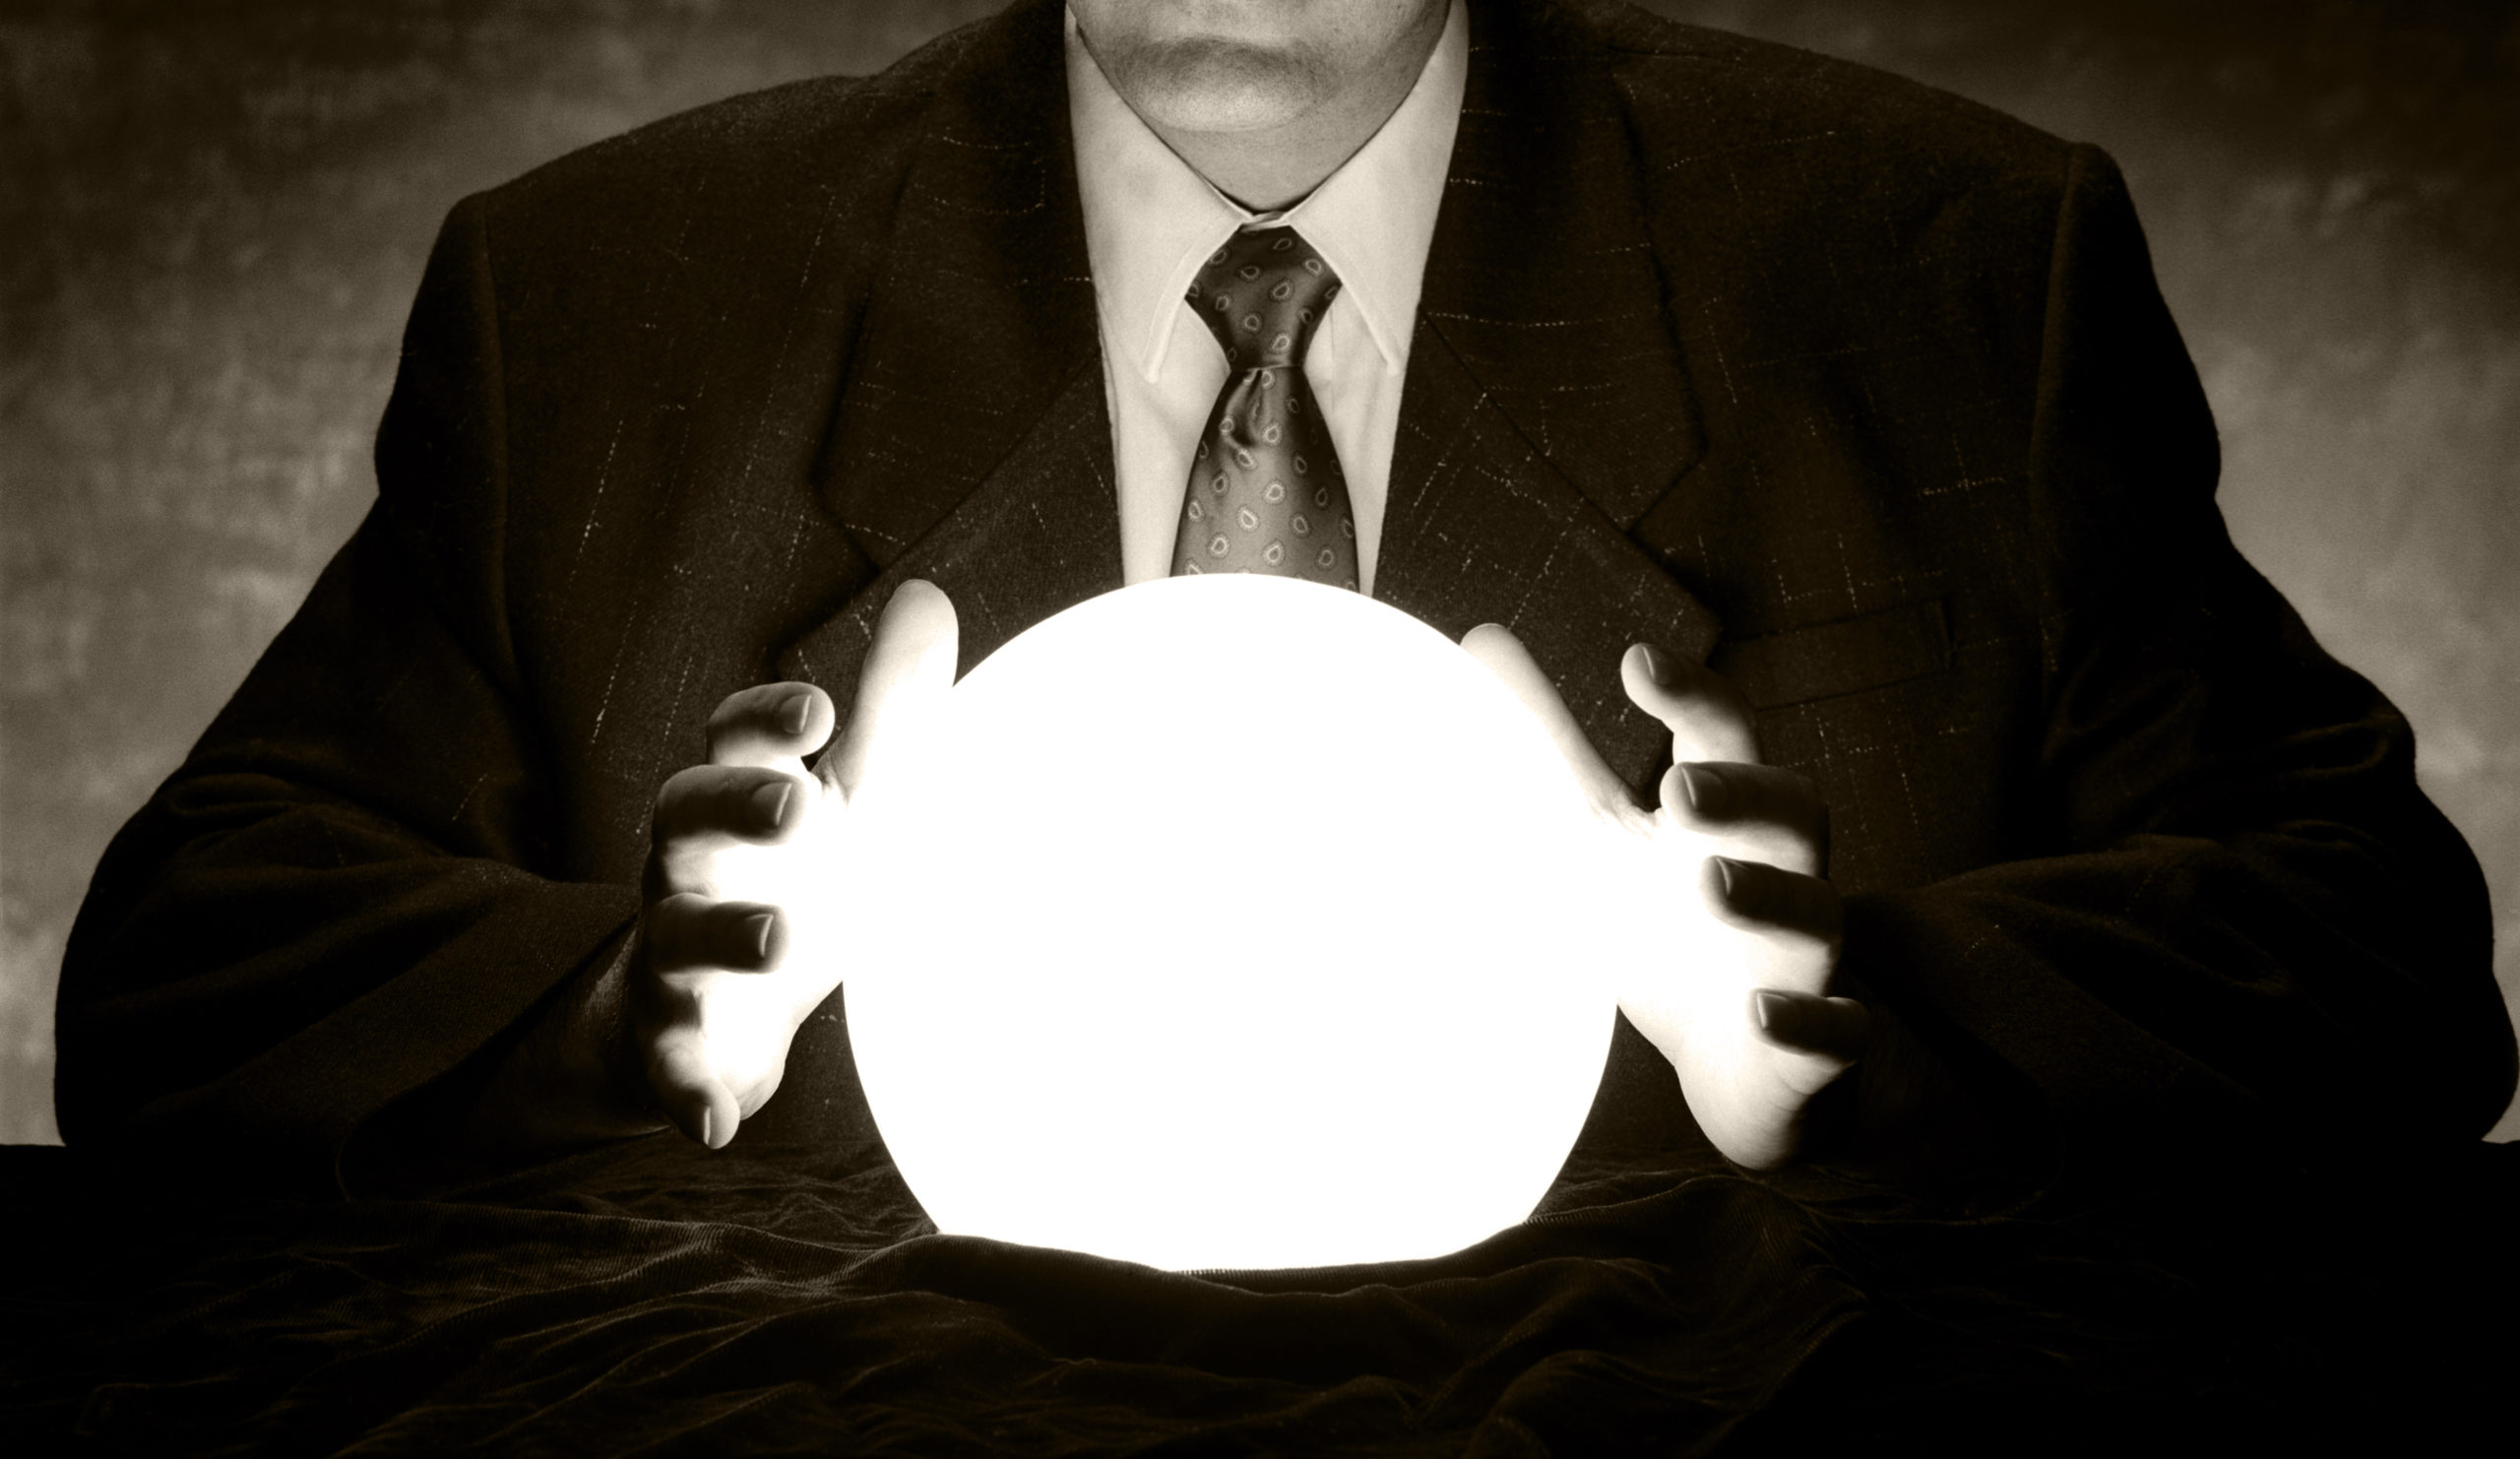 Man in suit holds hands over glowing crystal ball